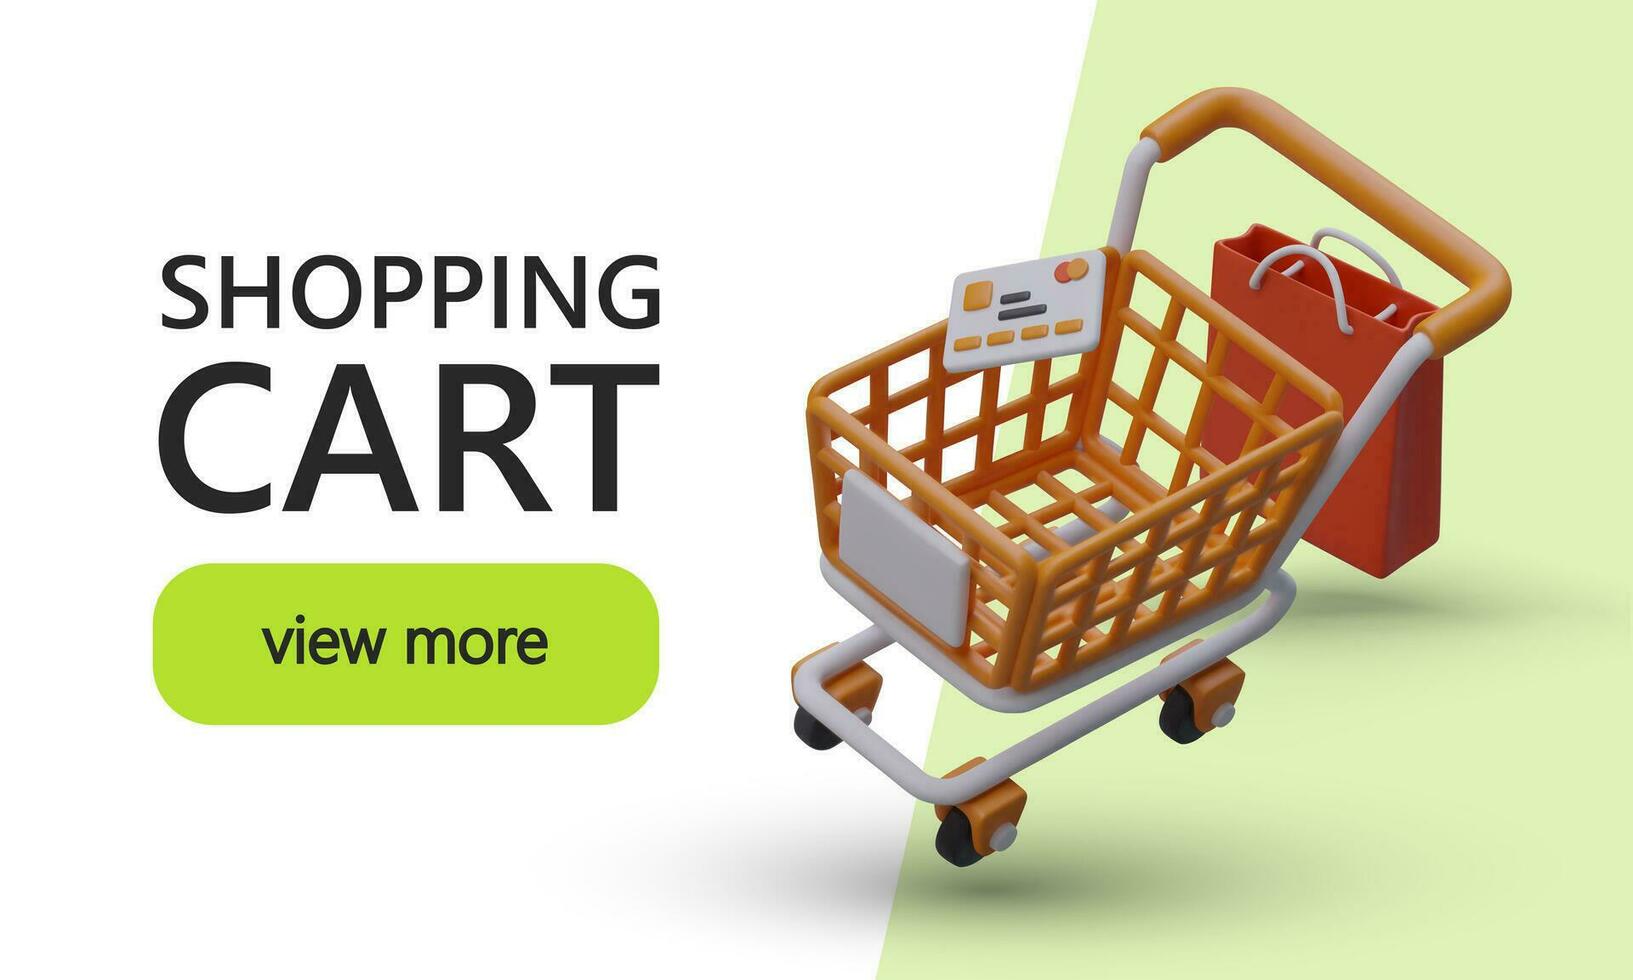 3D shopping cart, package, credit card. Shopping time. Advertising banner in cartoon style vector